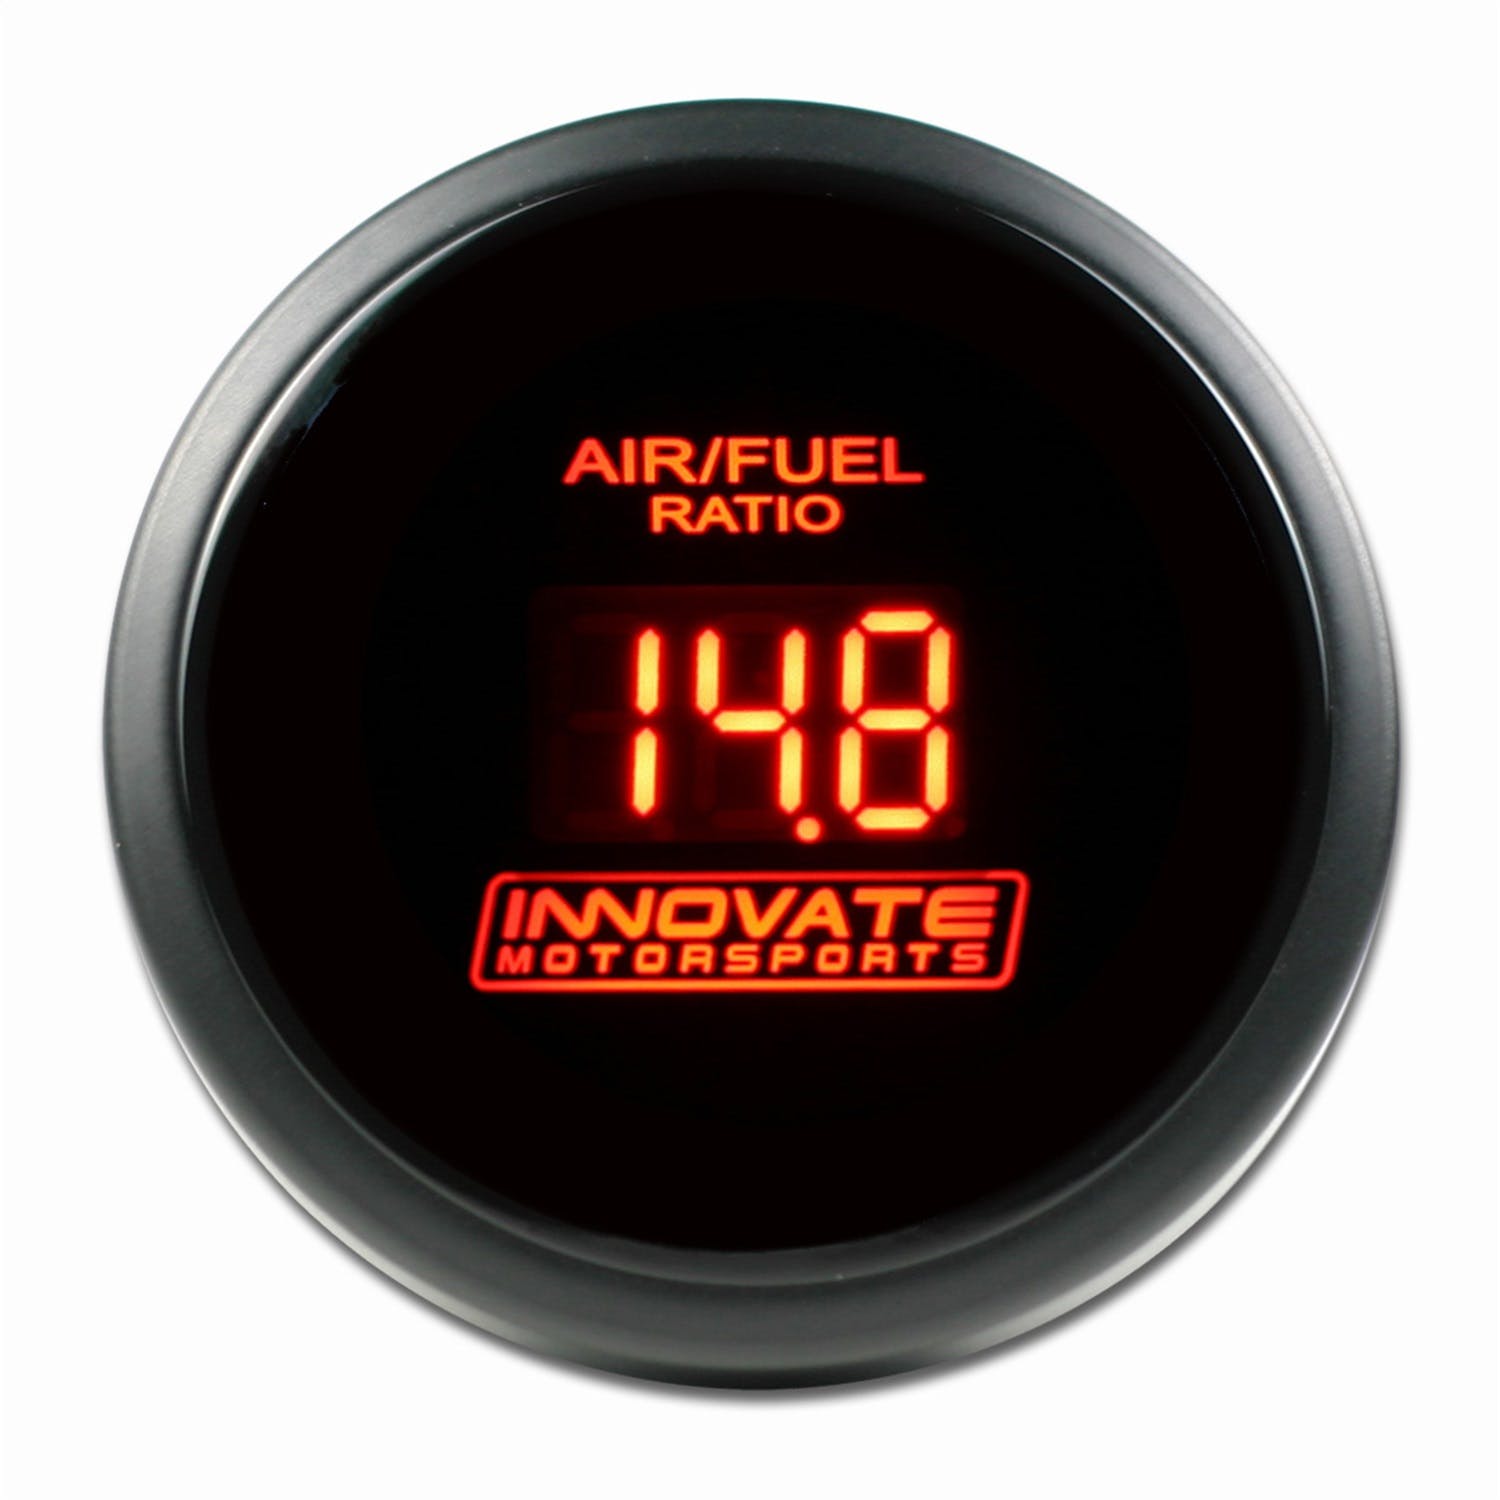 Innovate Motorsports 3794 DB Digital Air/Fuel Gauge (Red) for LC-1, LC-2, LM-1, or LM-2 products